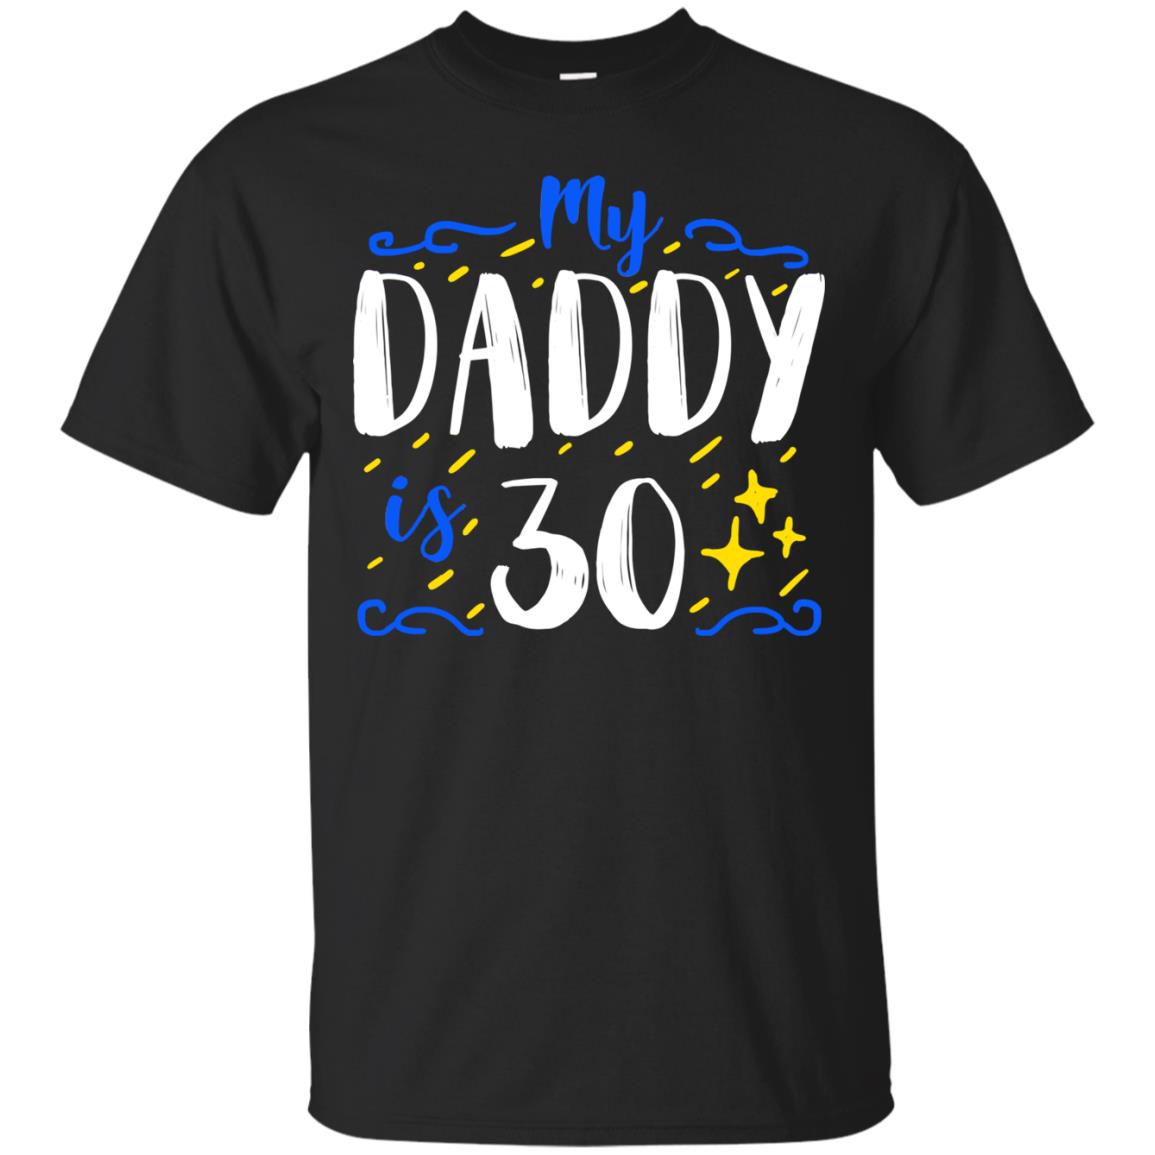 My Daddy Is 30 30th Birthday Daddy Shirt For Sons Or DaughtersG200 Gildan Ultra Cotton T-Shirt